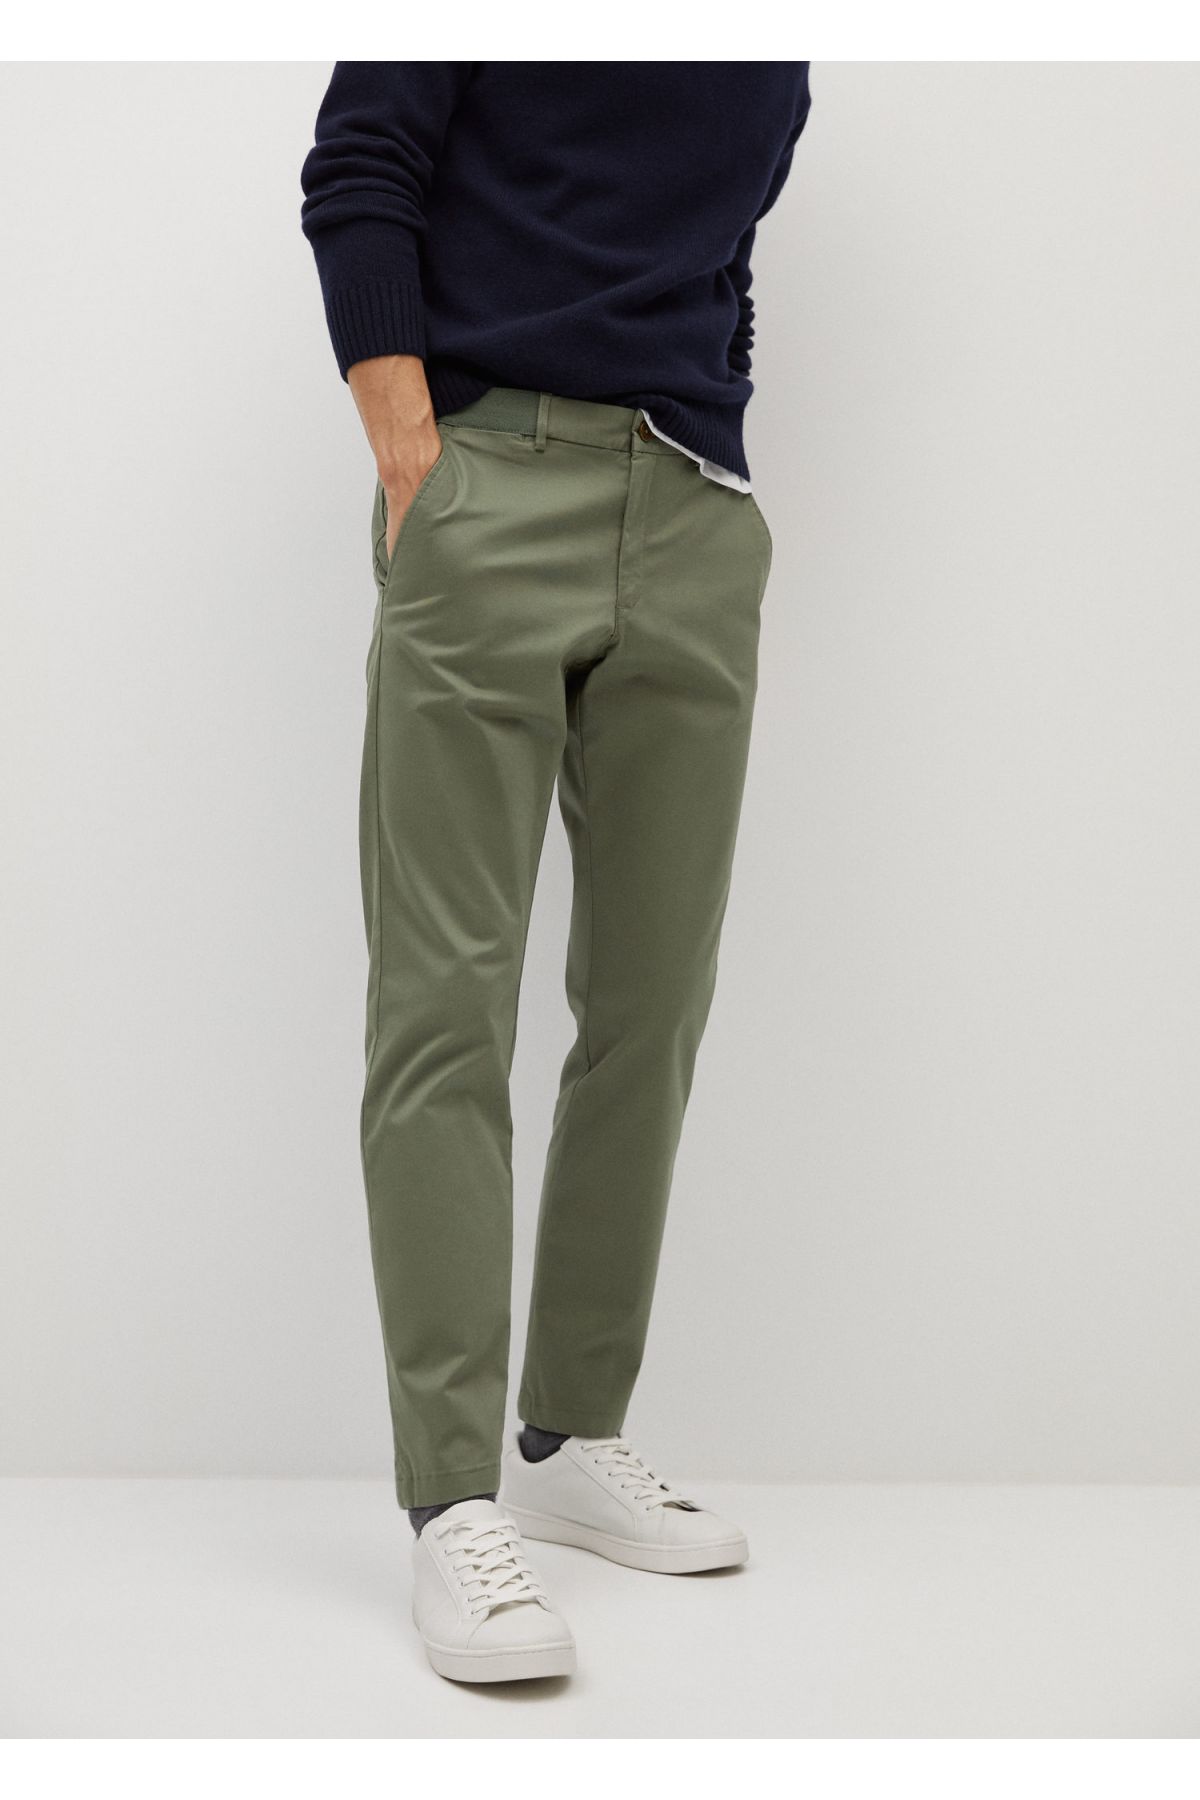 Wewewow - Mid Rise Plain Cropped Tapered Pants | YesStyle